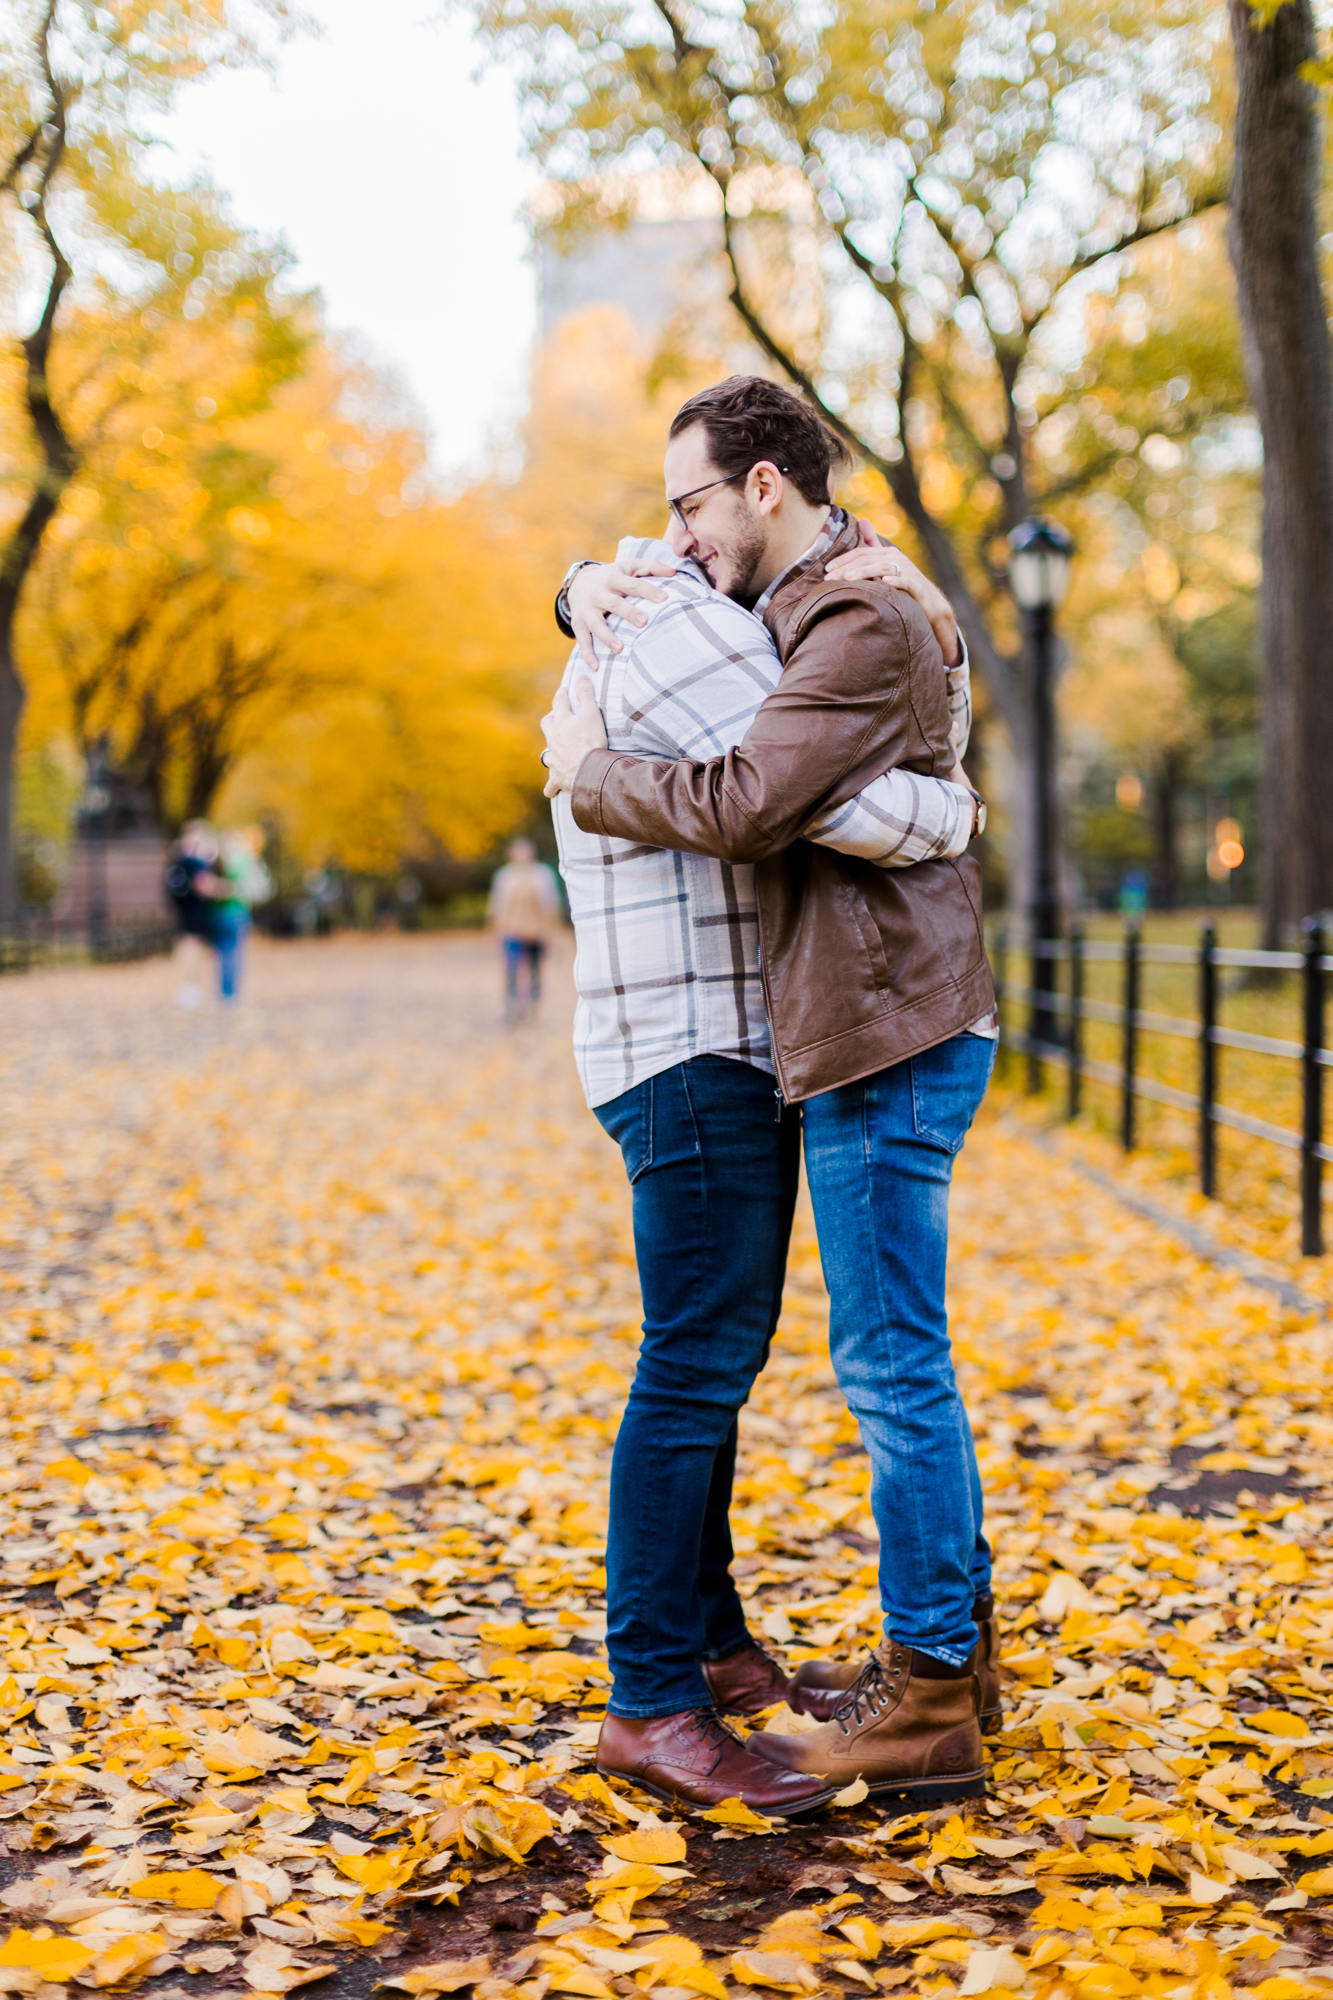 Dazzling Engagement Photo Shoot in Central Park